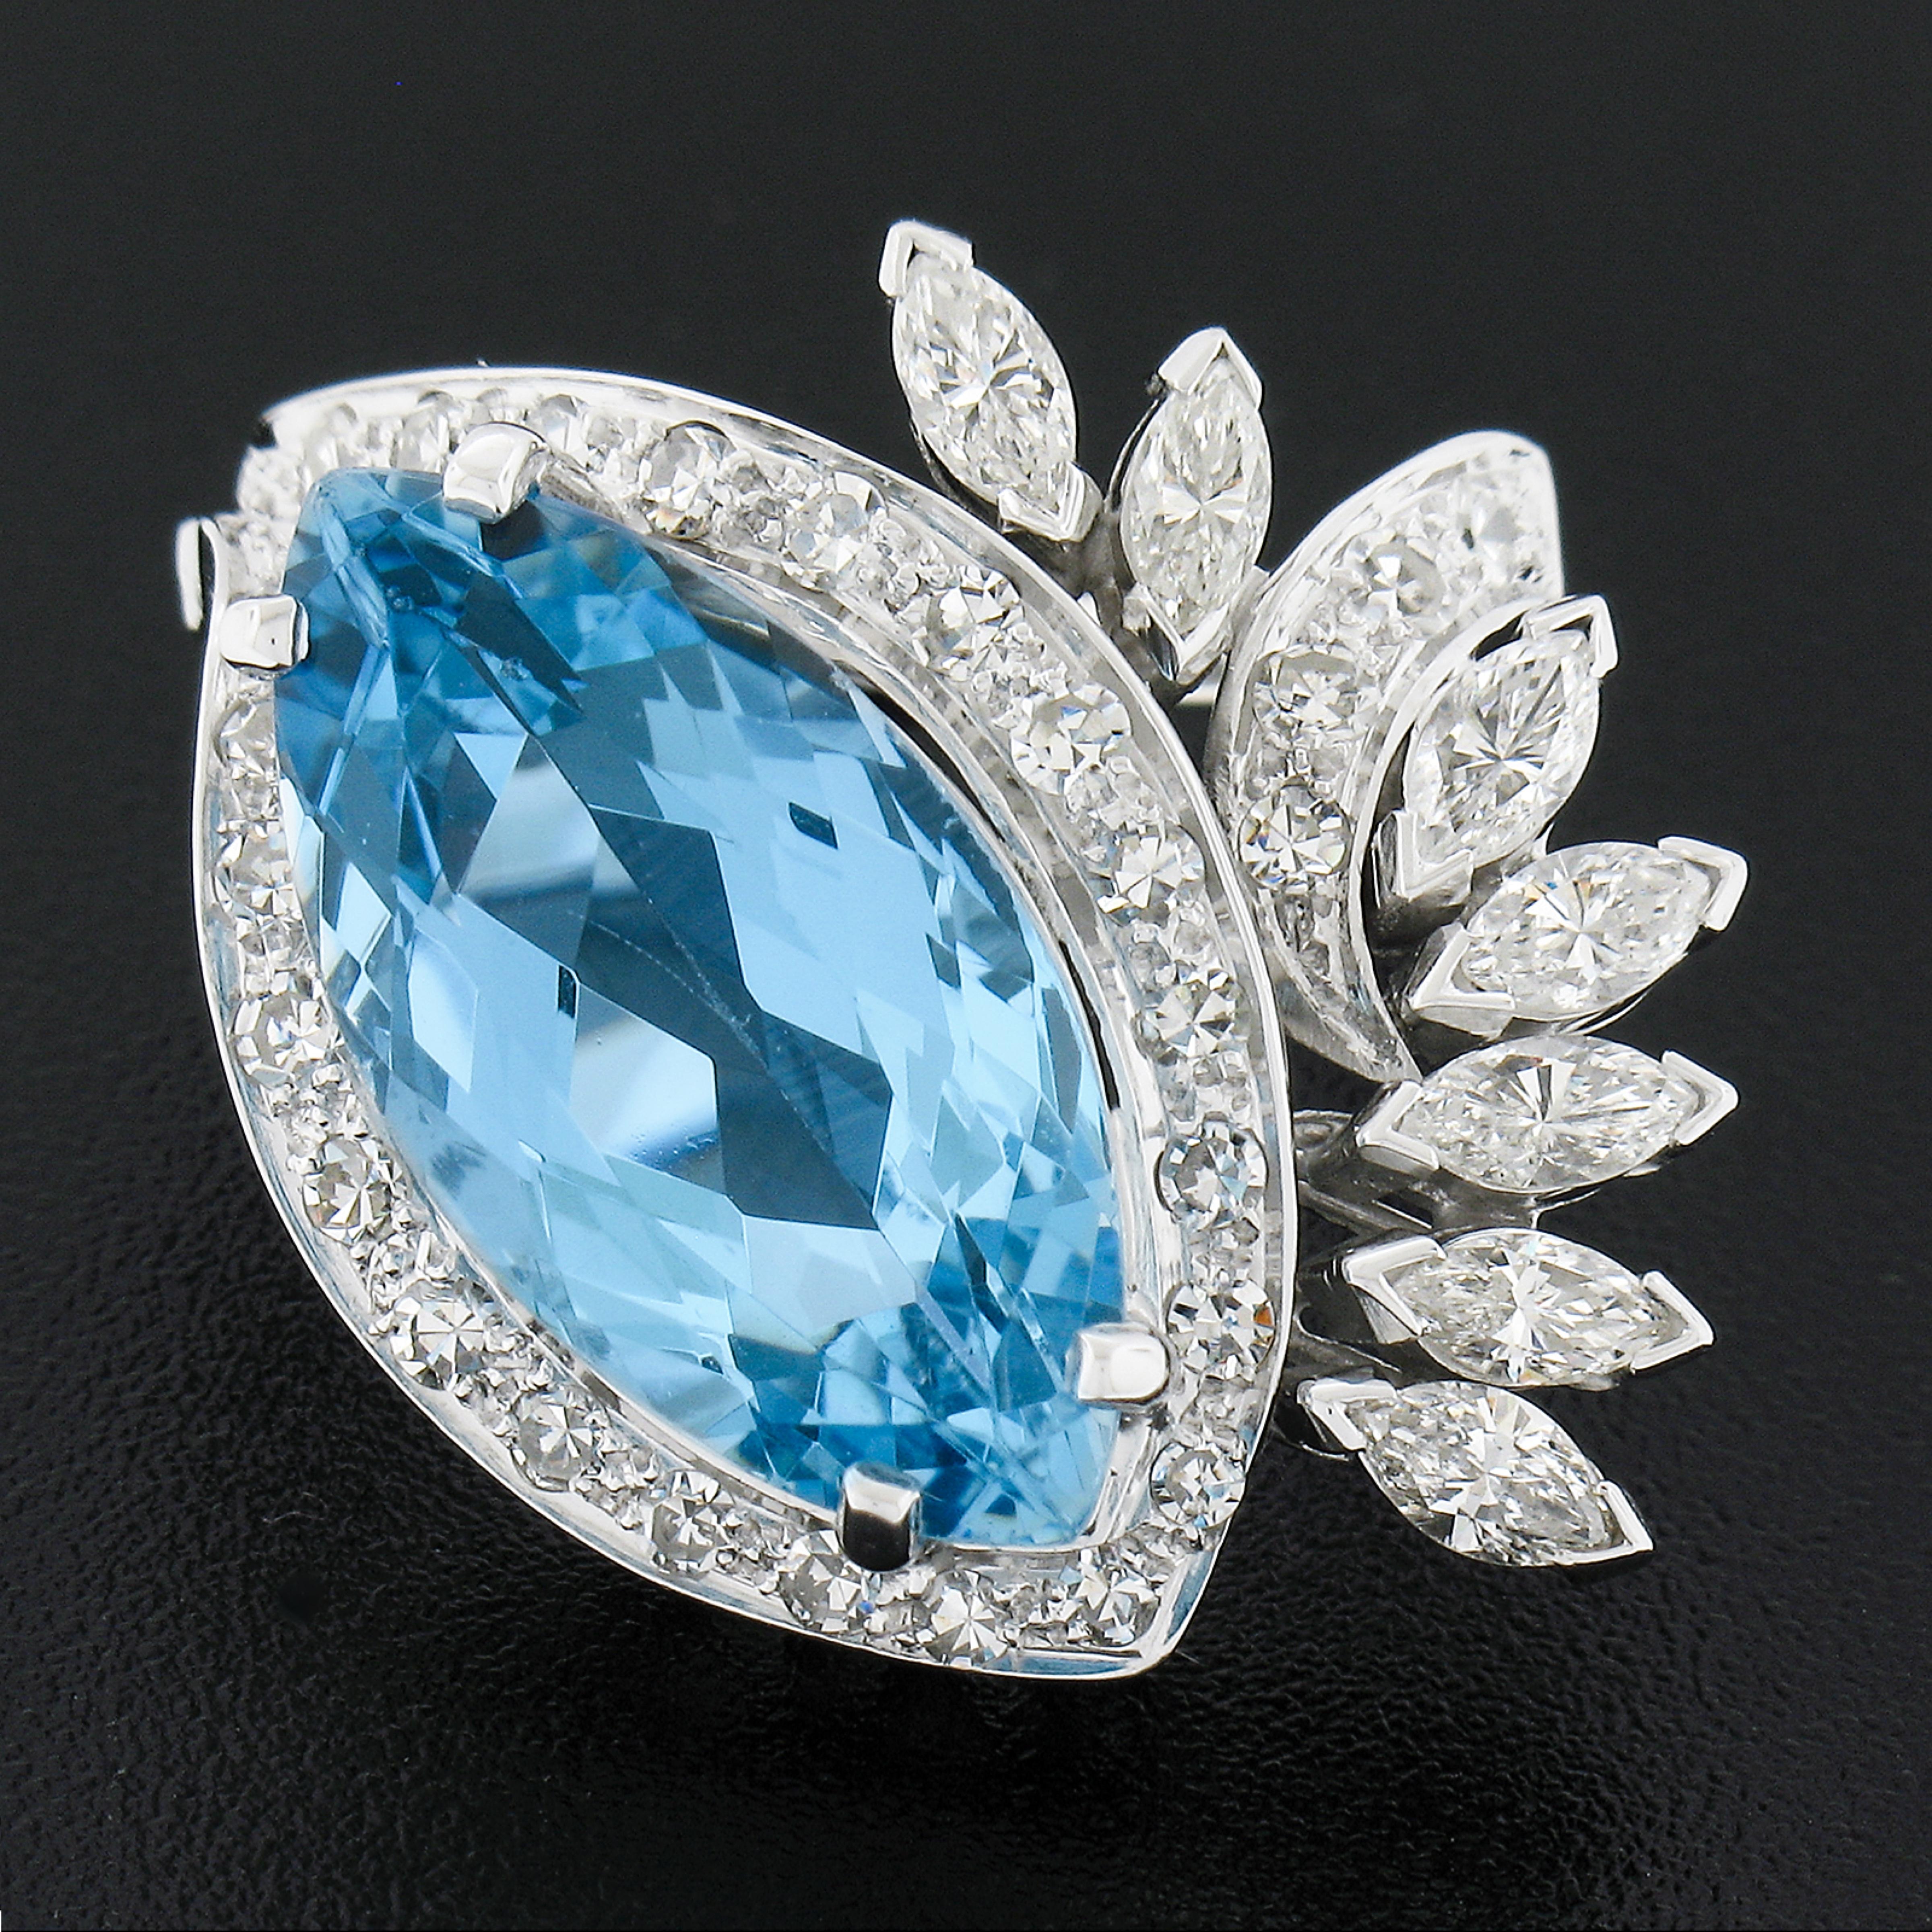 This magnificent and very well made mid-century statement ring is very well crafted in solid platinum and features a large, GIA certified, natural aquamarine solitaire set in a unique design that is drenched with very fine quality diamonds